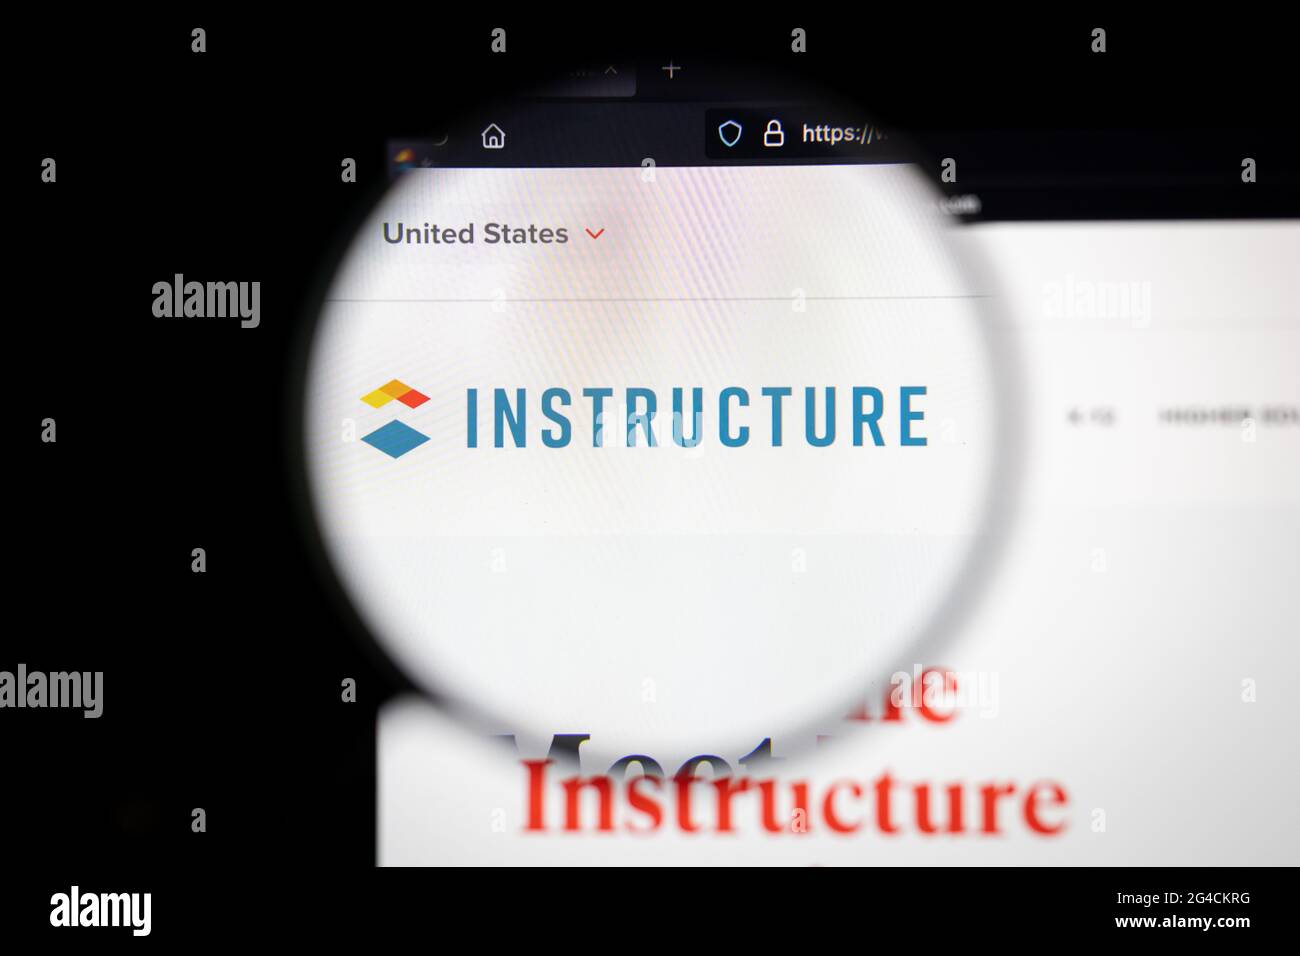 Instructure company logo on a website, seen on a computer screen through a magnifying glass. Stock Photo